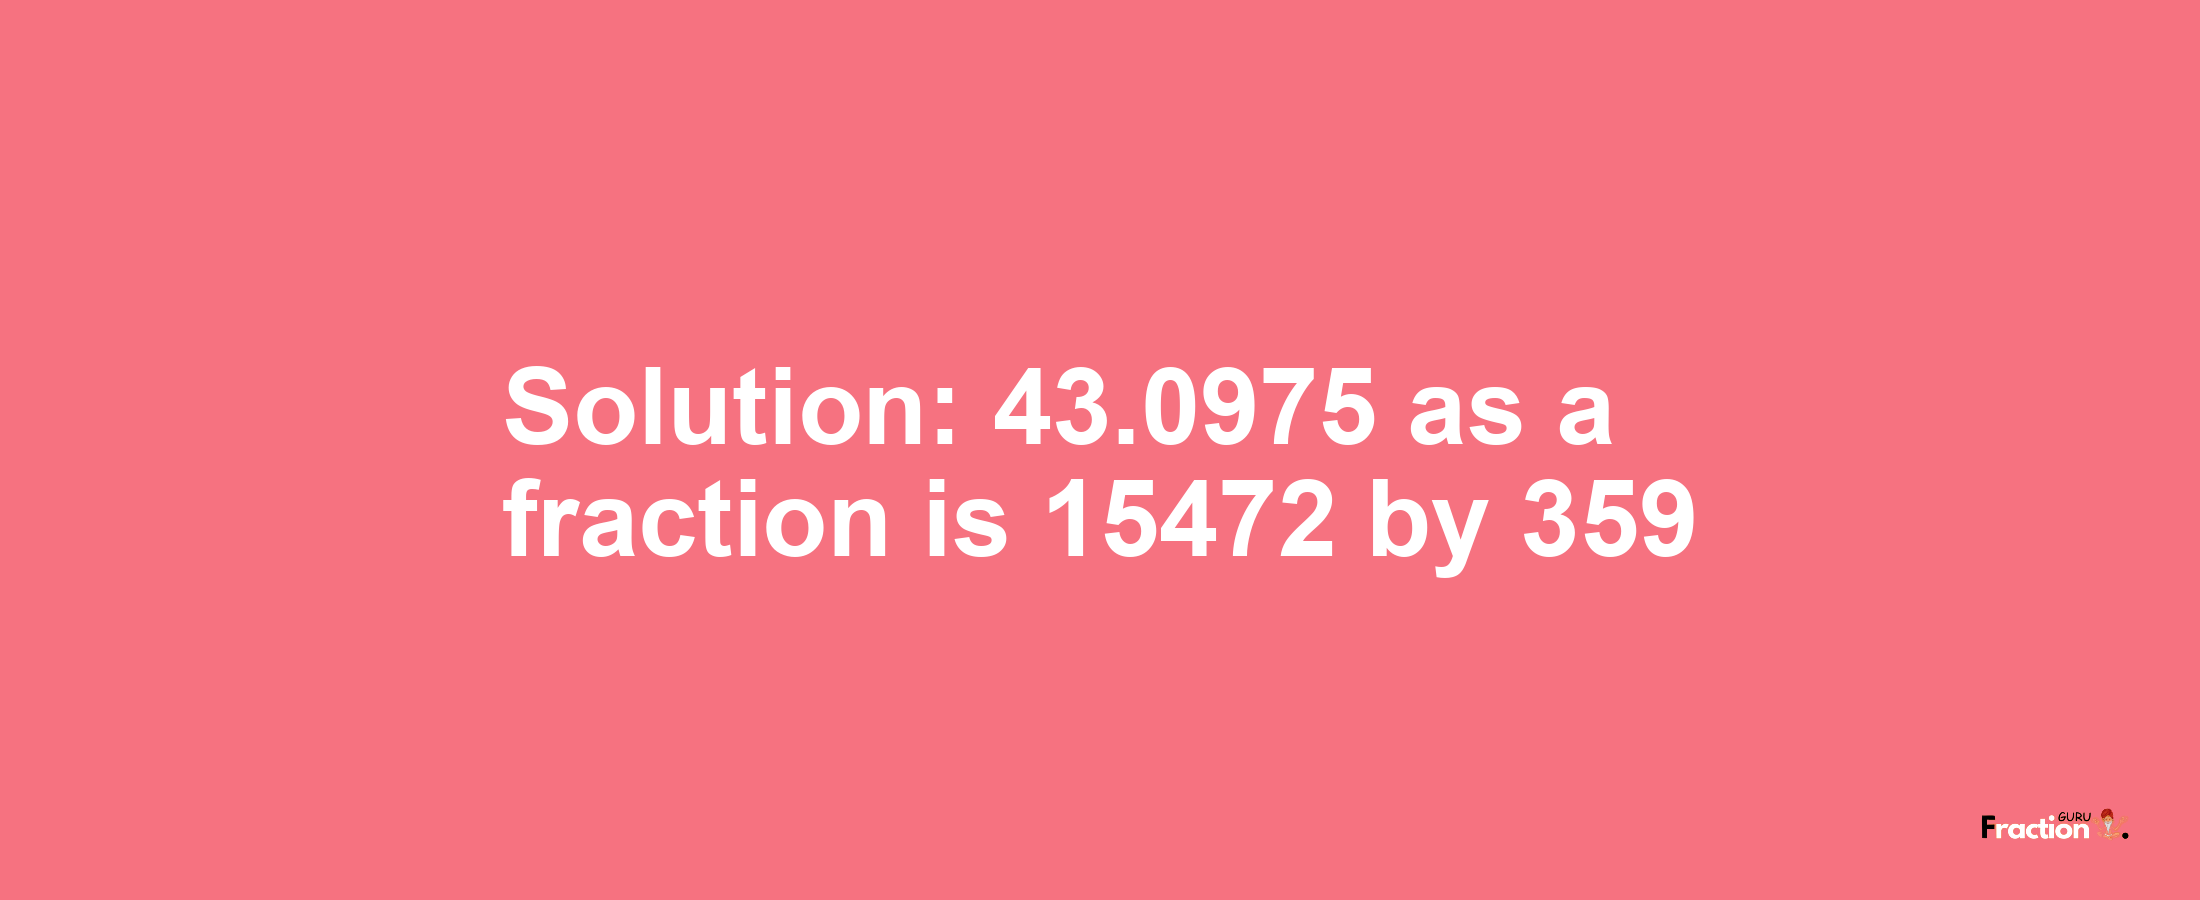 Solution:43.0975 as a fraction is 15472/359